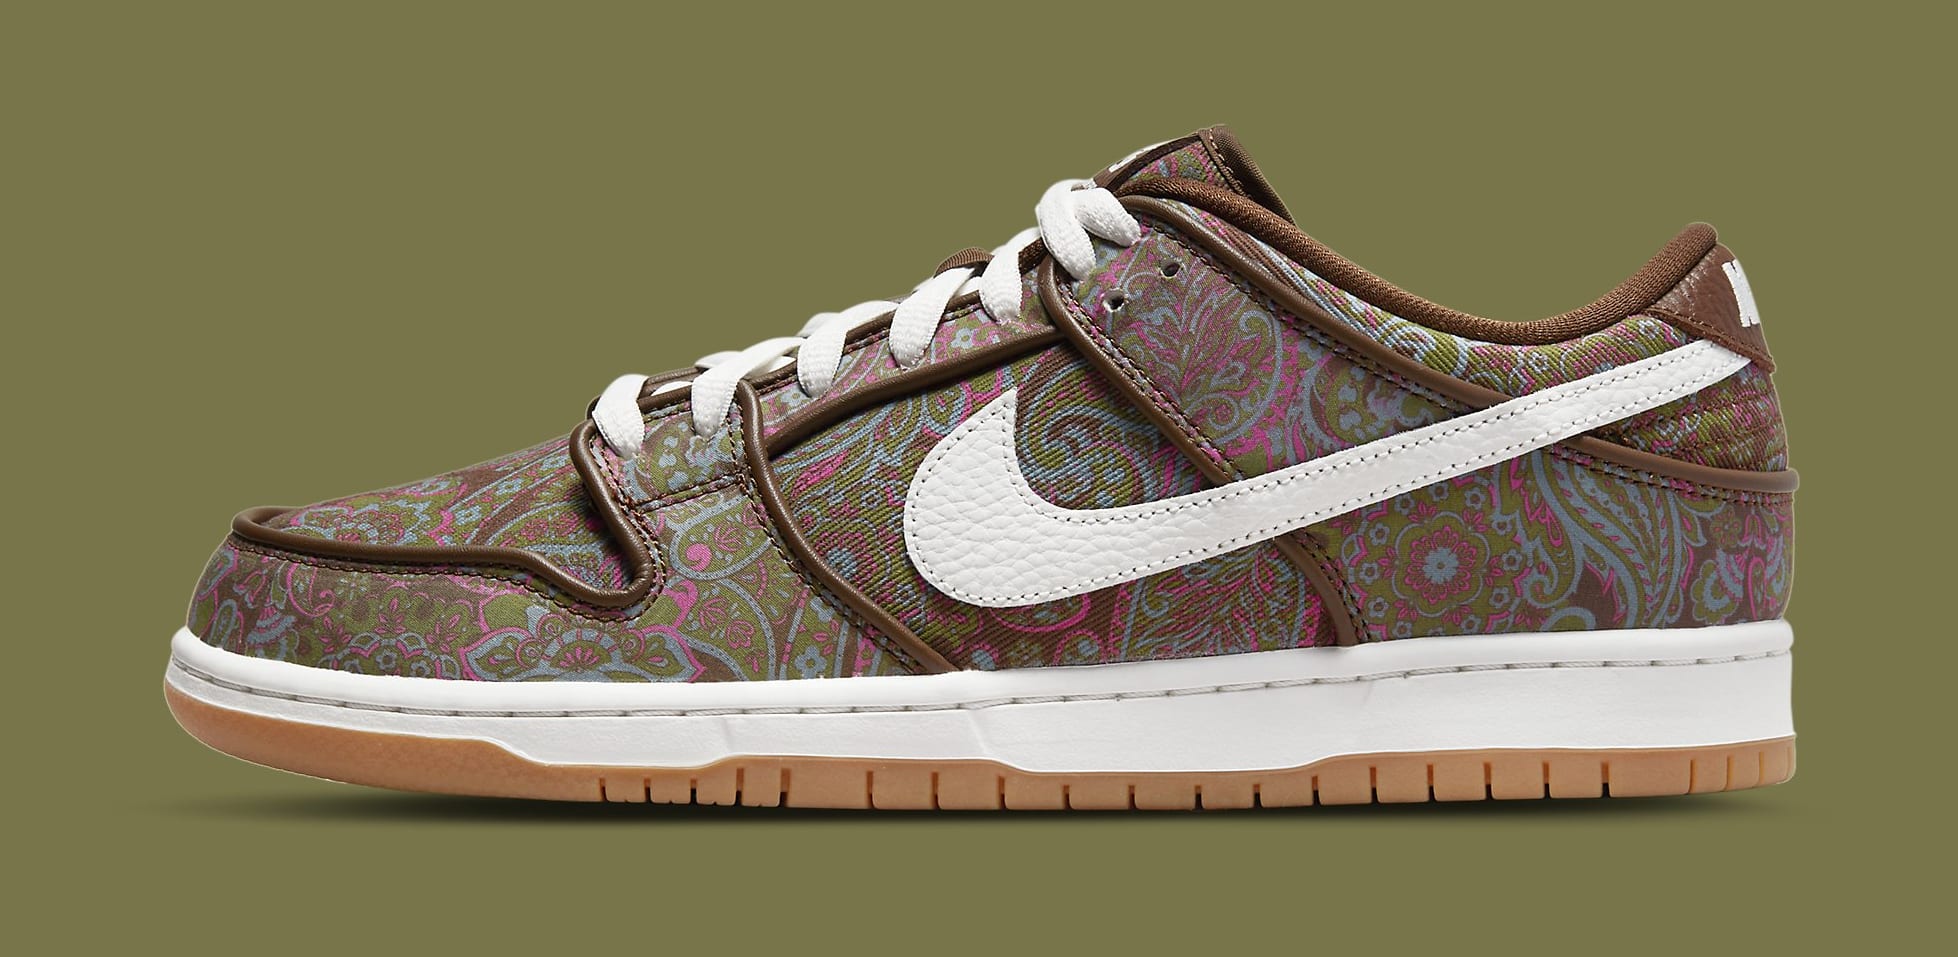 Nike SB Dunk Low 'Paisley' DH7534 200 Lateral